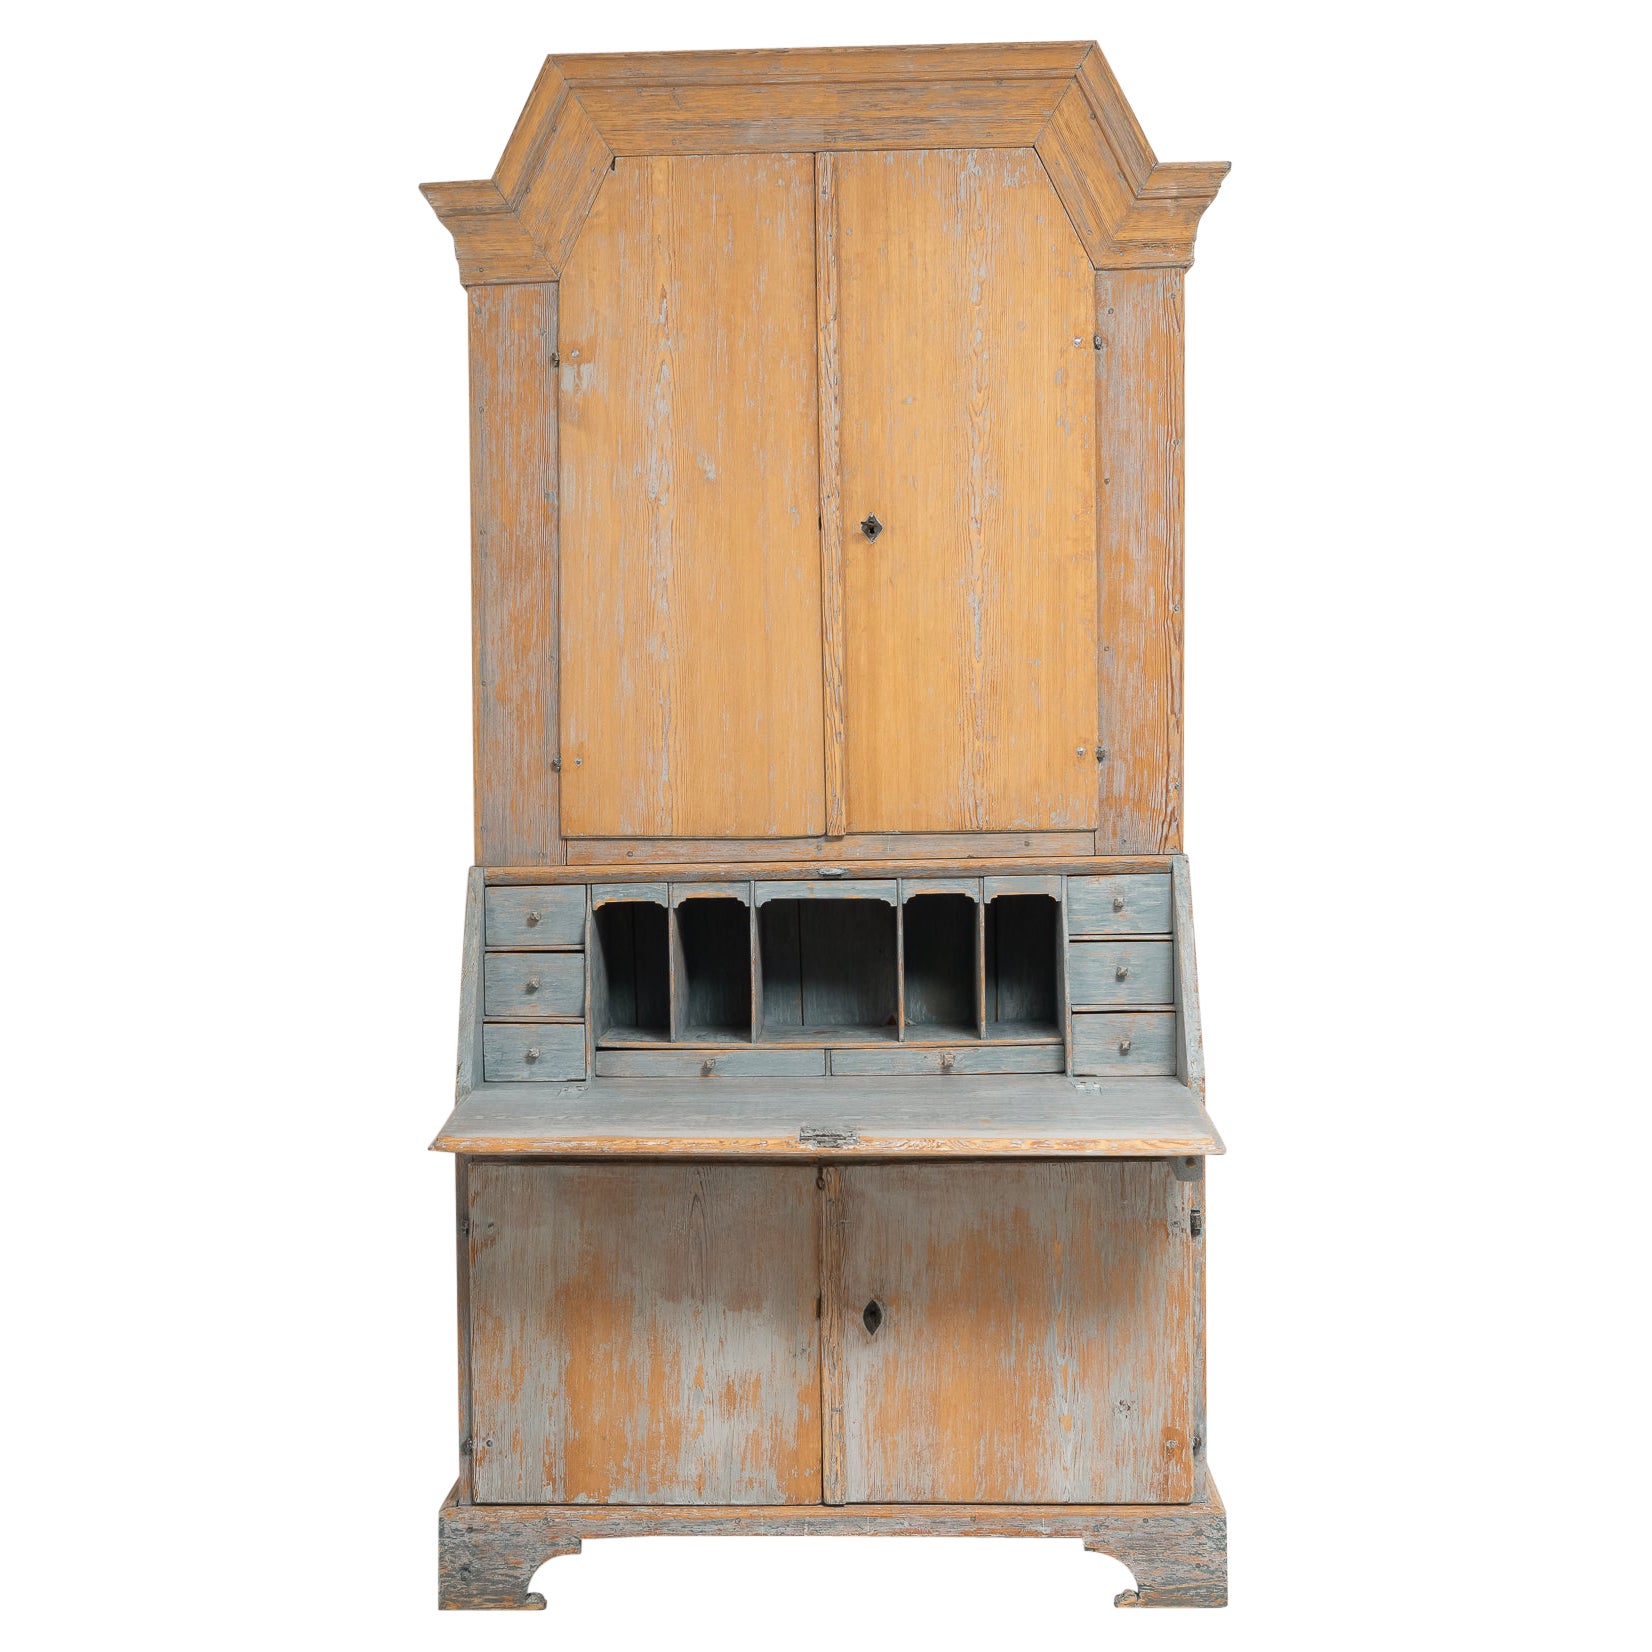 Early 1800s Swedish Country Baroque Style Secretary Cabinet